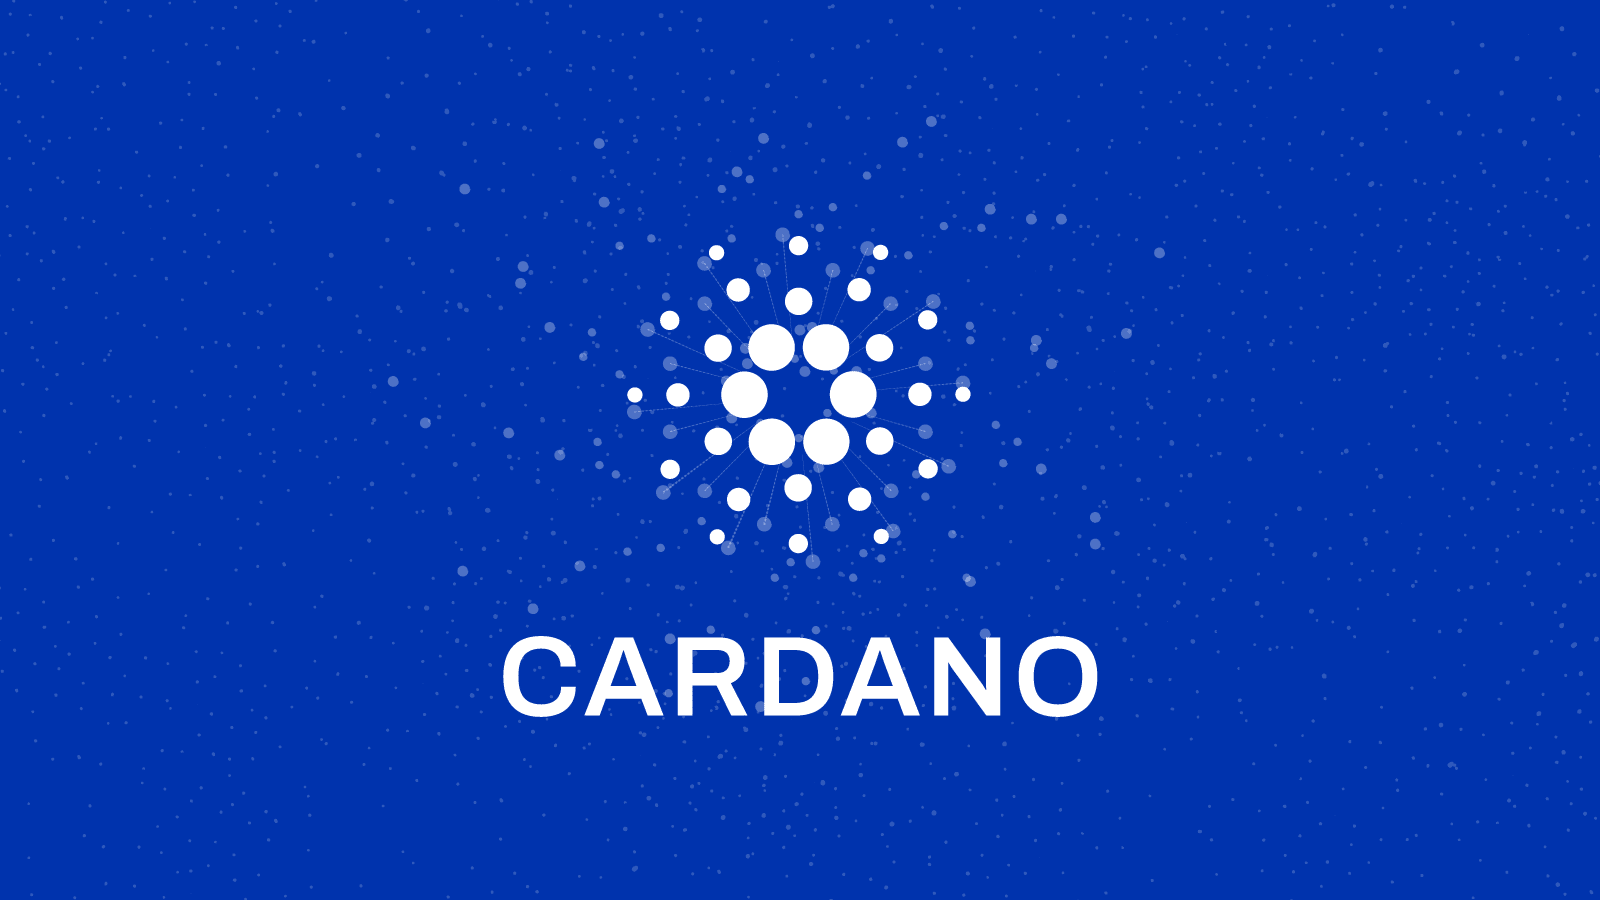 Cardano Flourishes With Alonzo Update and Green Initiative